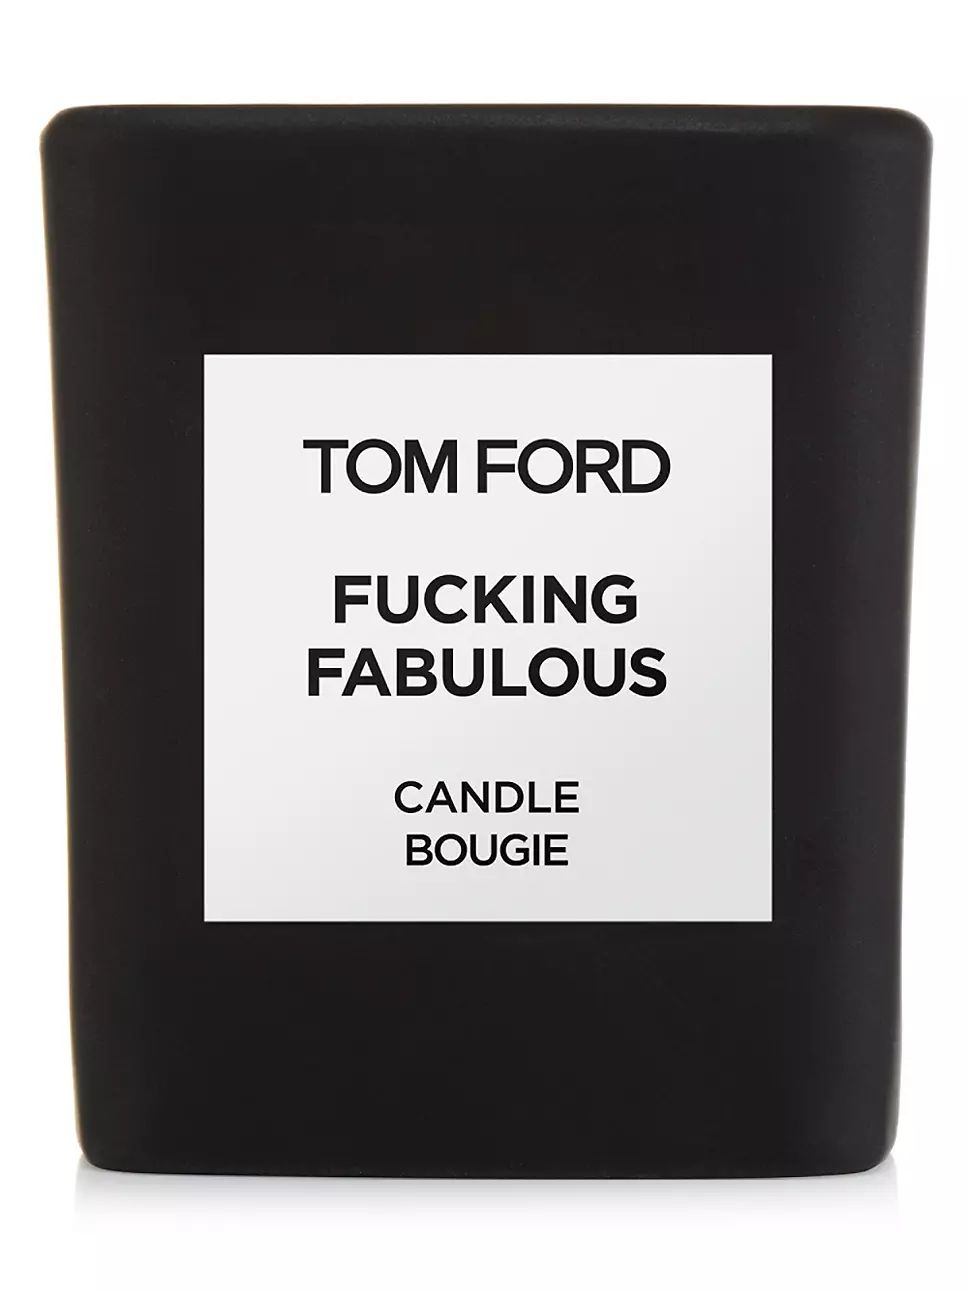 TOM FORD Fabulous Candle | Saks Fifth Avenue